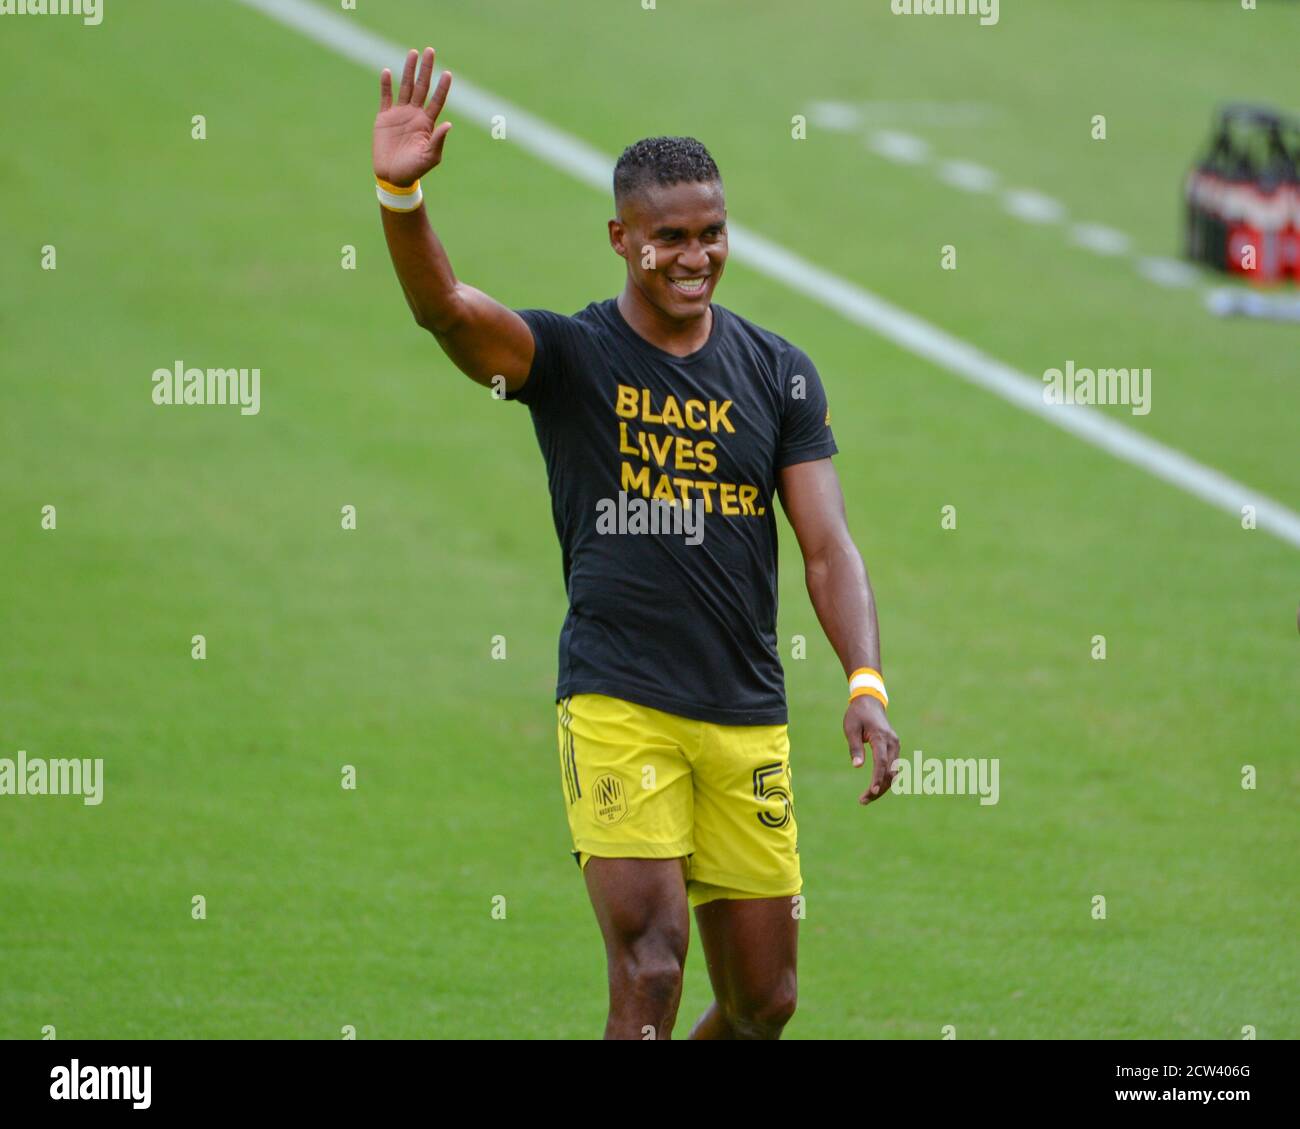 Nashville, TN, USA. 26th Sep, 2020. Nashville defender, Brayan Beckeles (55), waves to the camera and fans during the MLS match between the Houston Dynamo and Nashville SC at Nissan Stadium in Nashville, TN. Kevin Langley/CSM/Alamy Live News Stock Photo